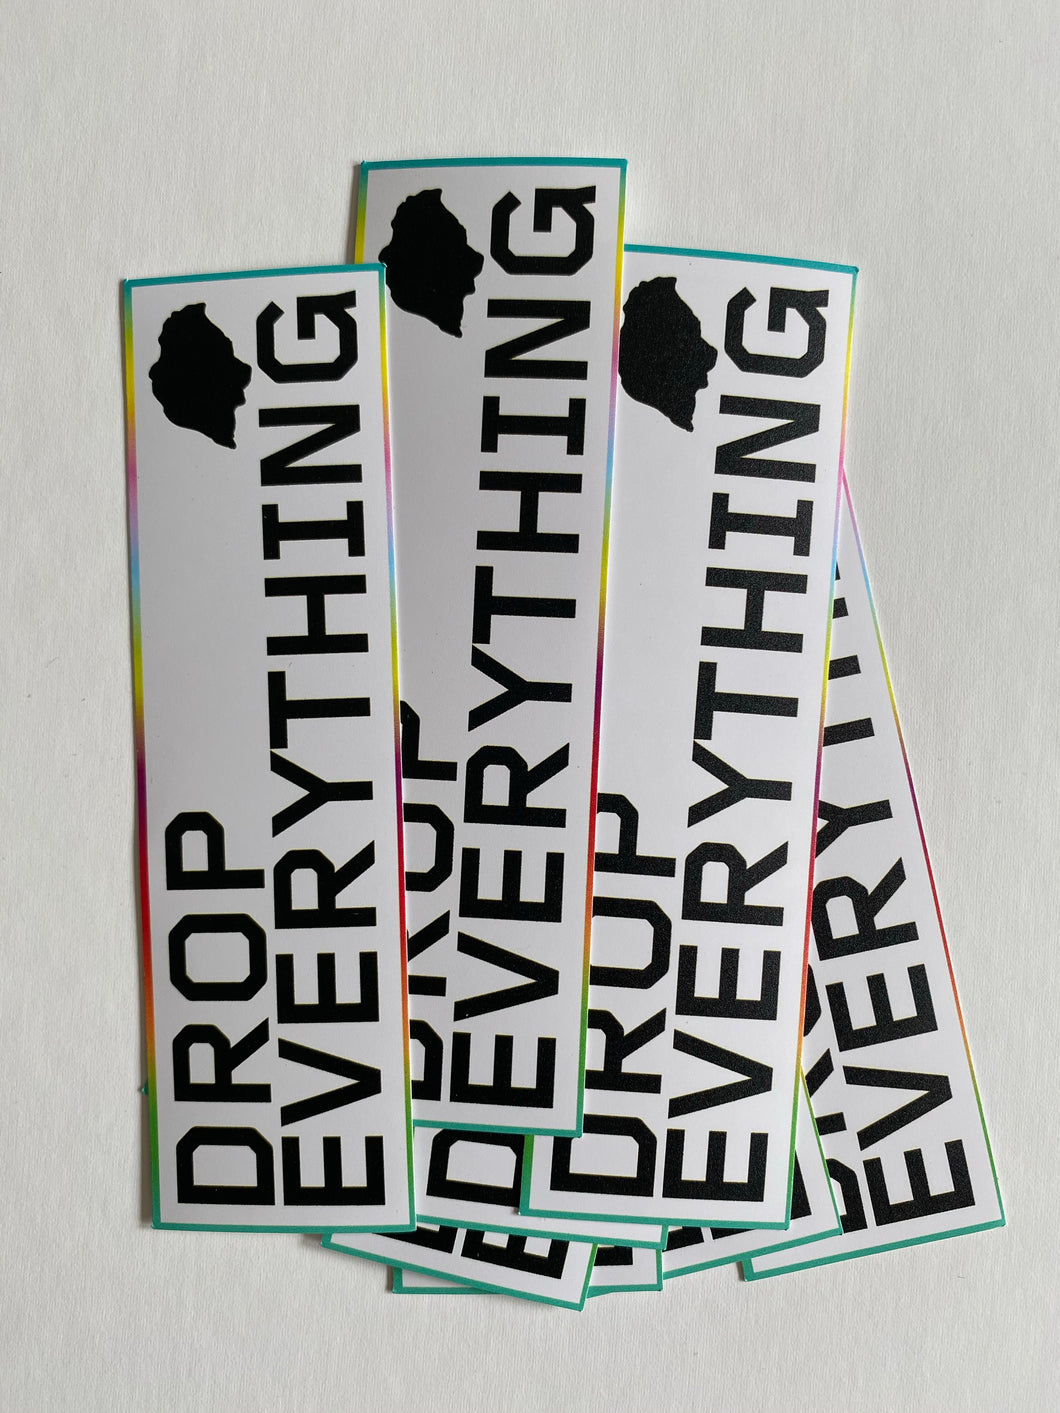 Bumper (or whatever) stickers